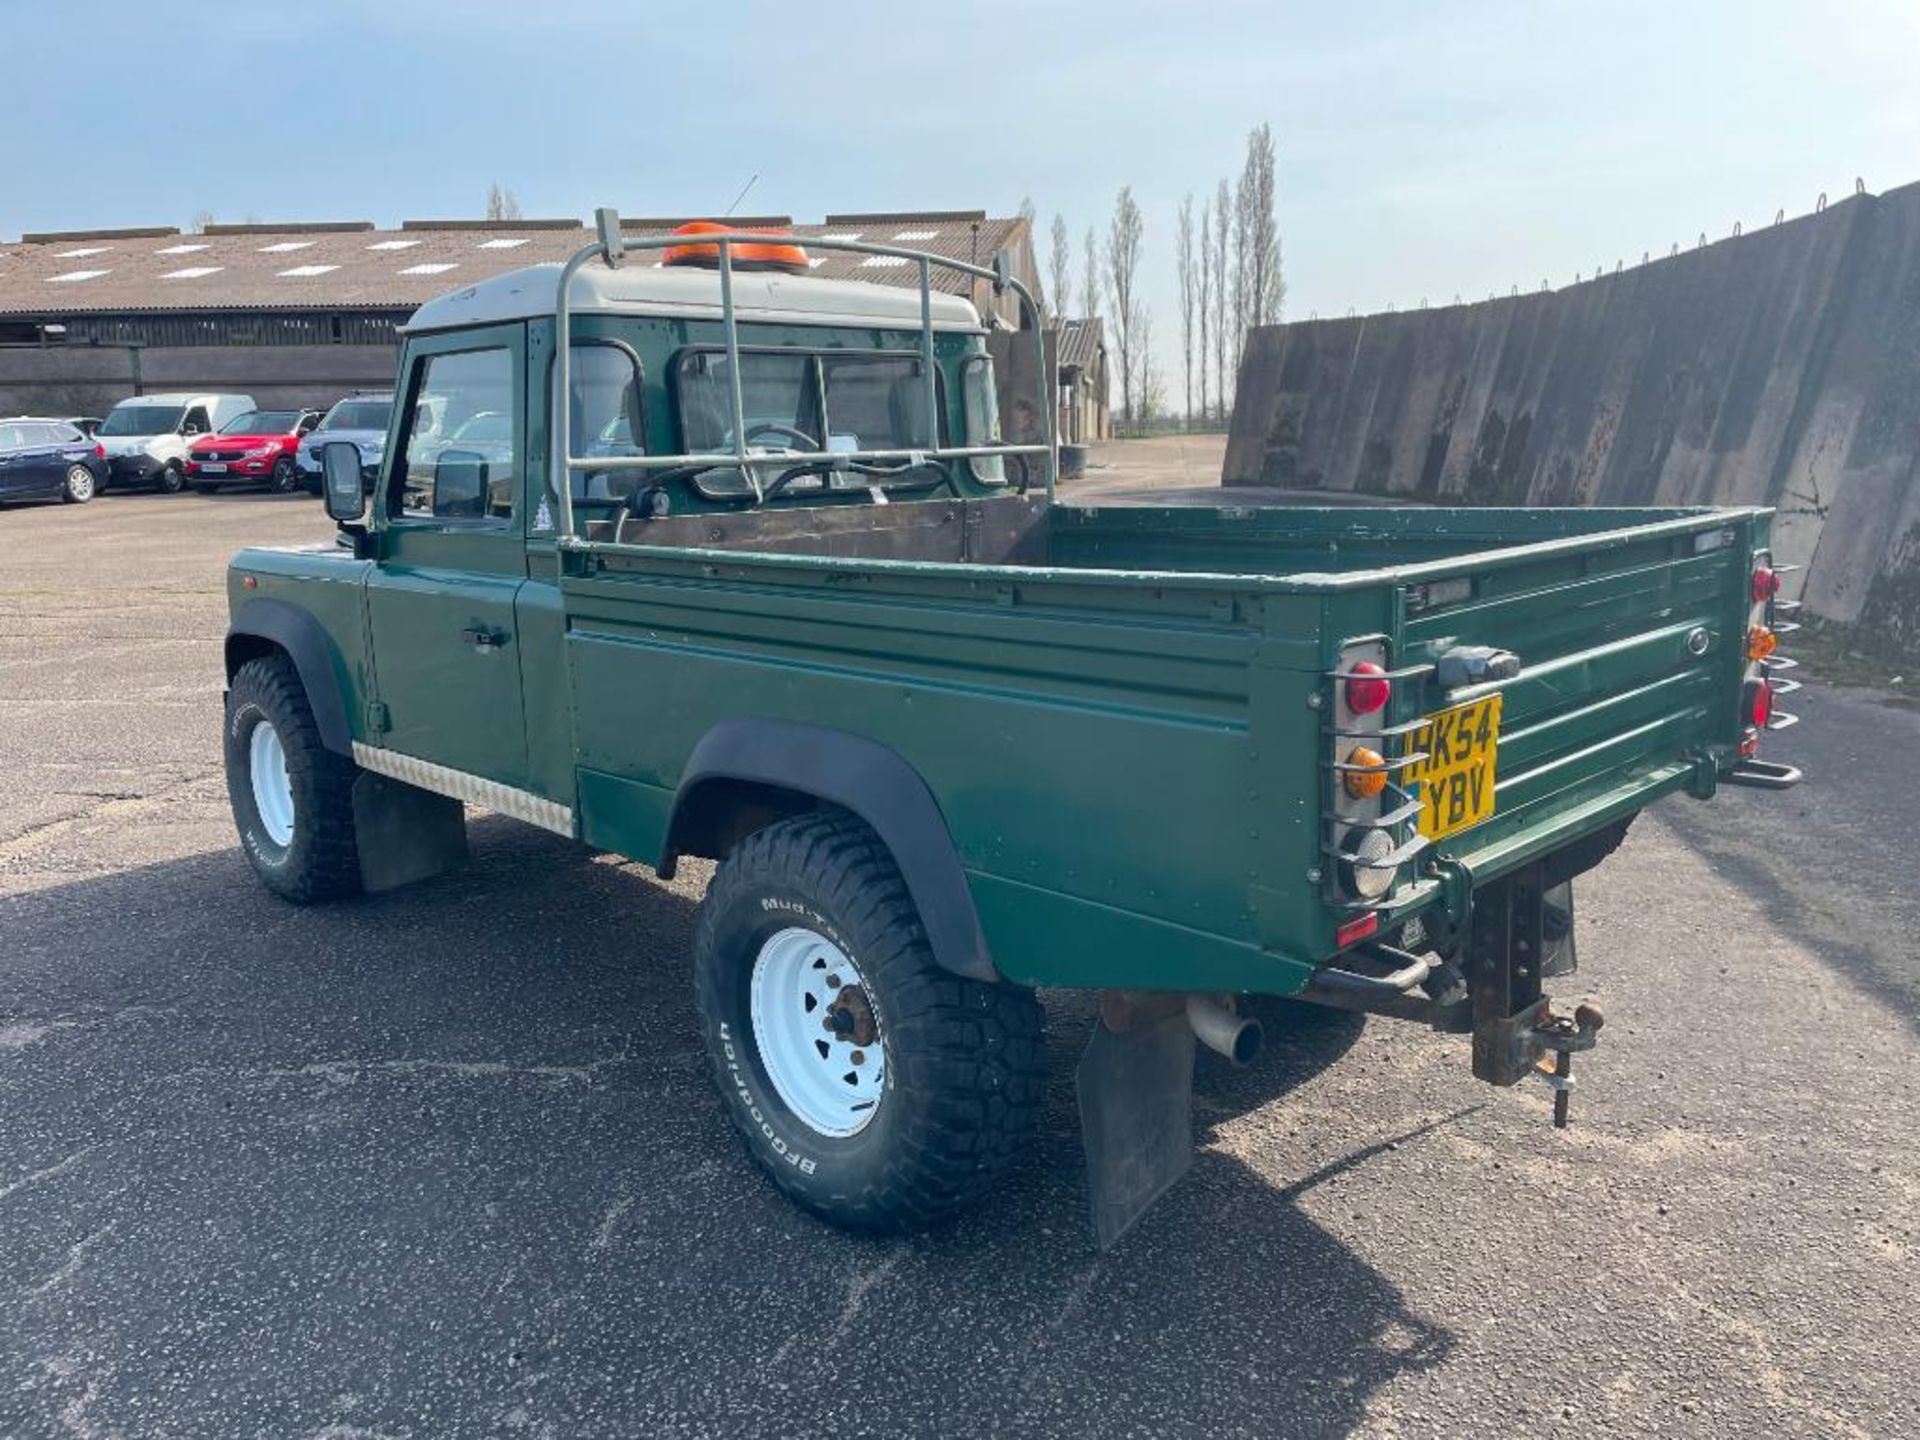 2004 Land Rover Defender 110 High-Capacity Pickup TD5, 4wd, manual, green, 2 door, with leather upho - Image 9 of 13